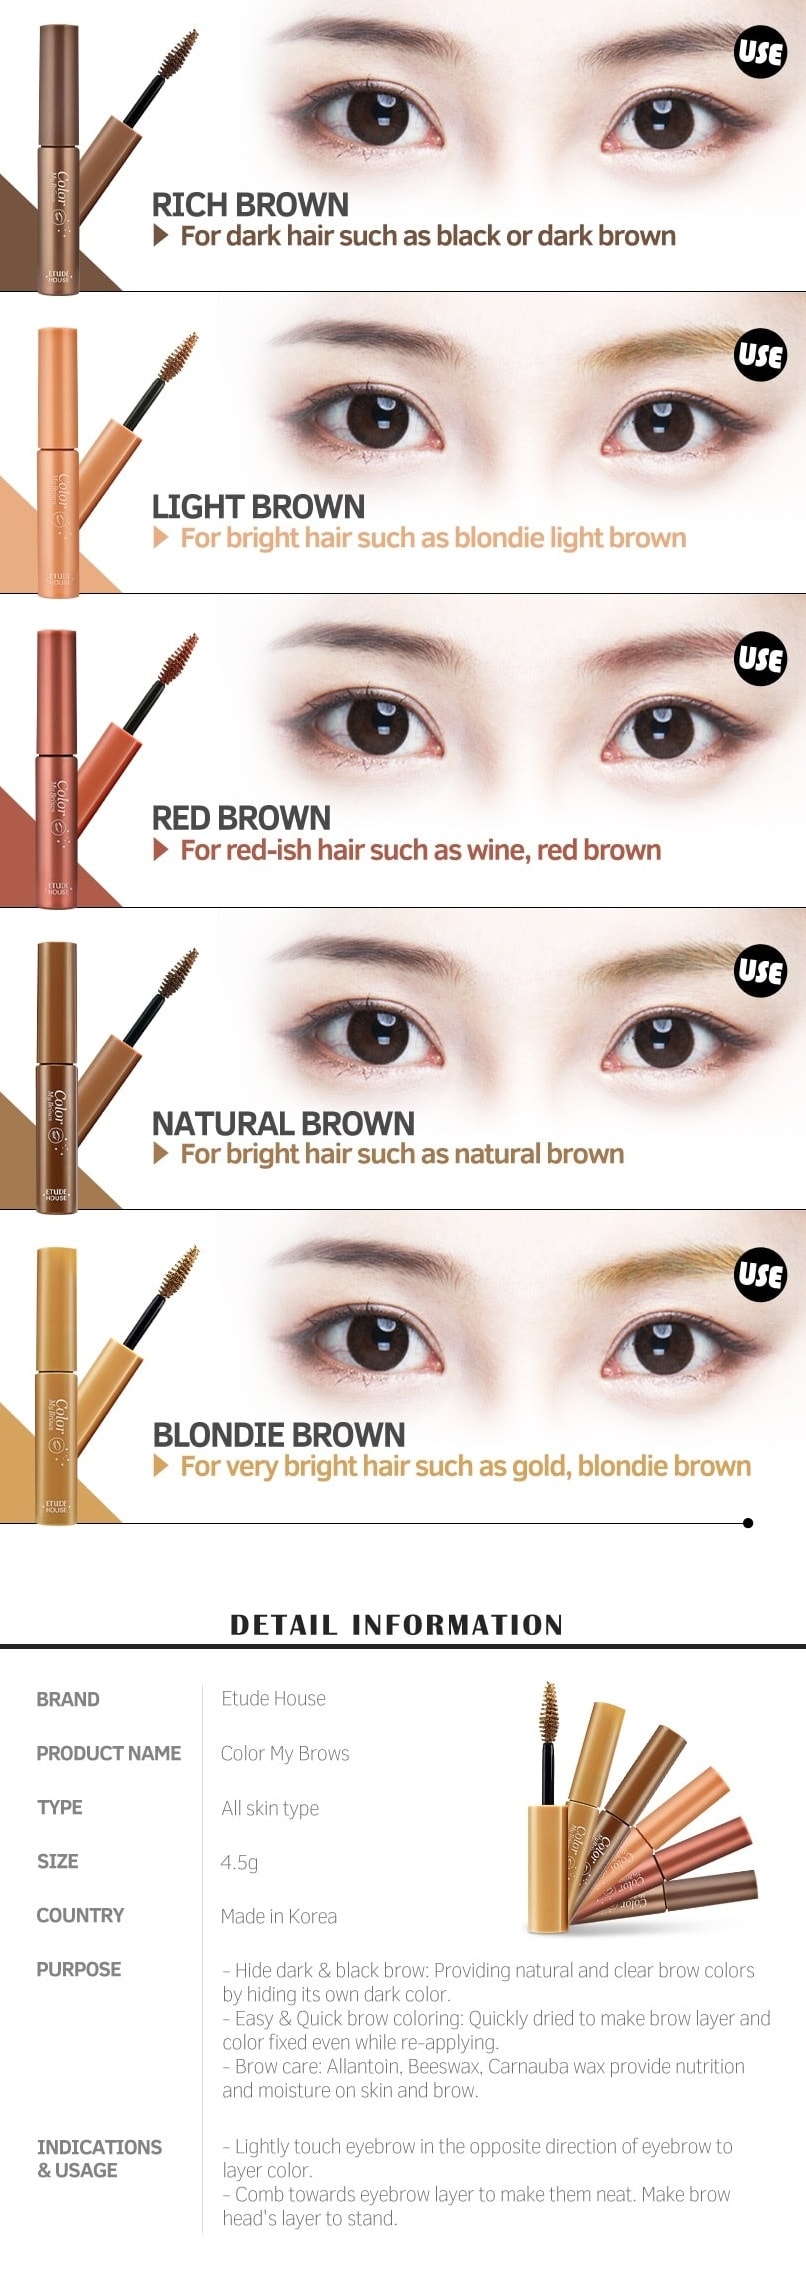 Color My Brows 4.5g Colors Description How to use